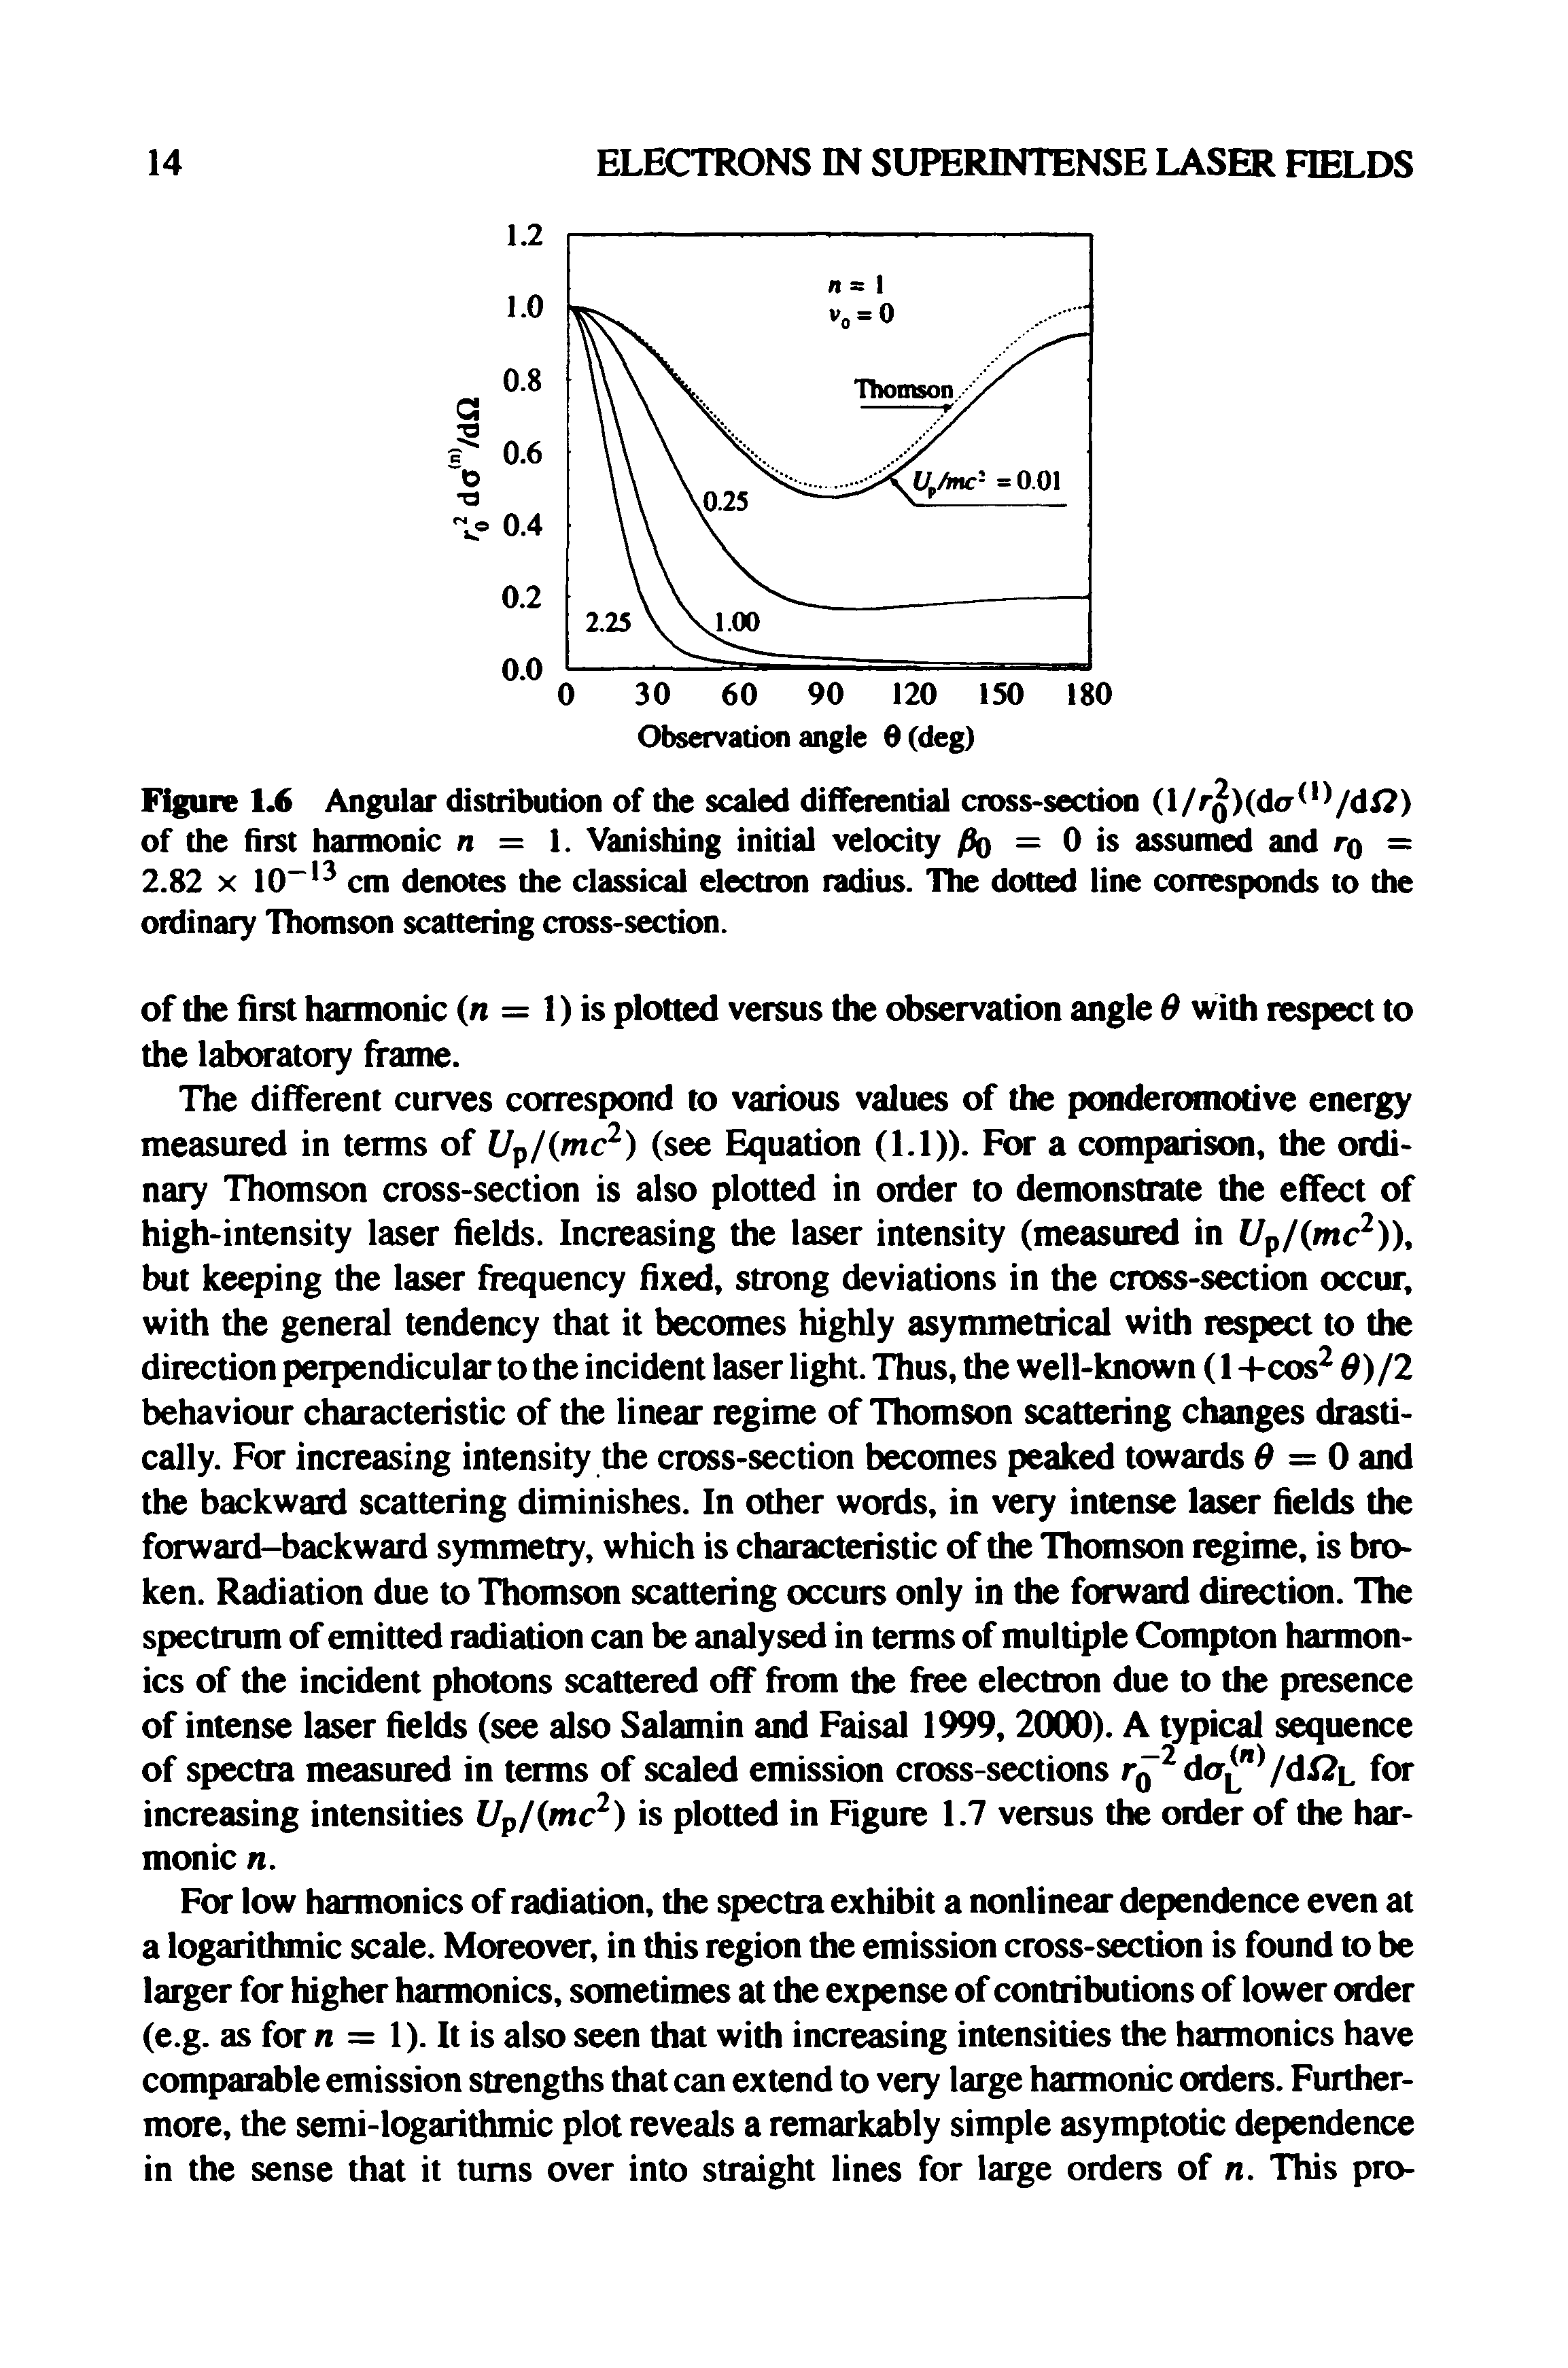 Figure 1.6 Angular distribution of the scaled differential cross-section (l/r Kdo 1 VdJ ) of the first harmonic n — 1. Vanishing initial velocity fo = 0 is assumed and tq = 2.82 x 10 13 cm denotes the classical electron radius. The dotted line corresponds to the ordinary Thomson scattering cross-section.